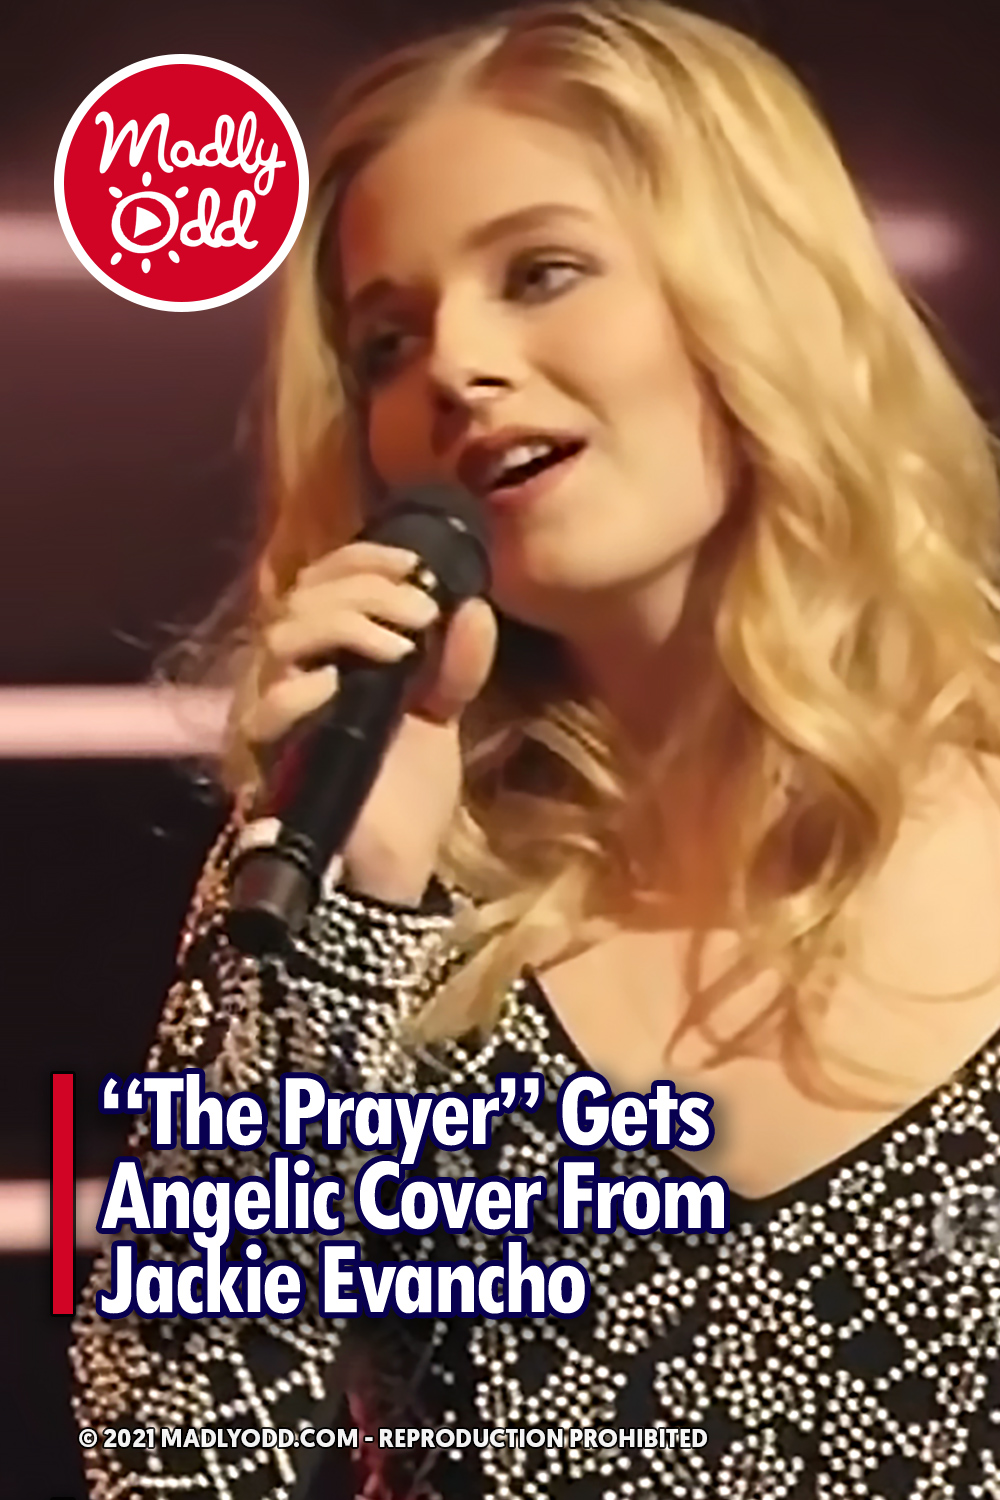 “The Prayer” Gets Angelic Cover From Jackie Evancho